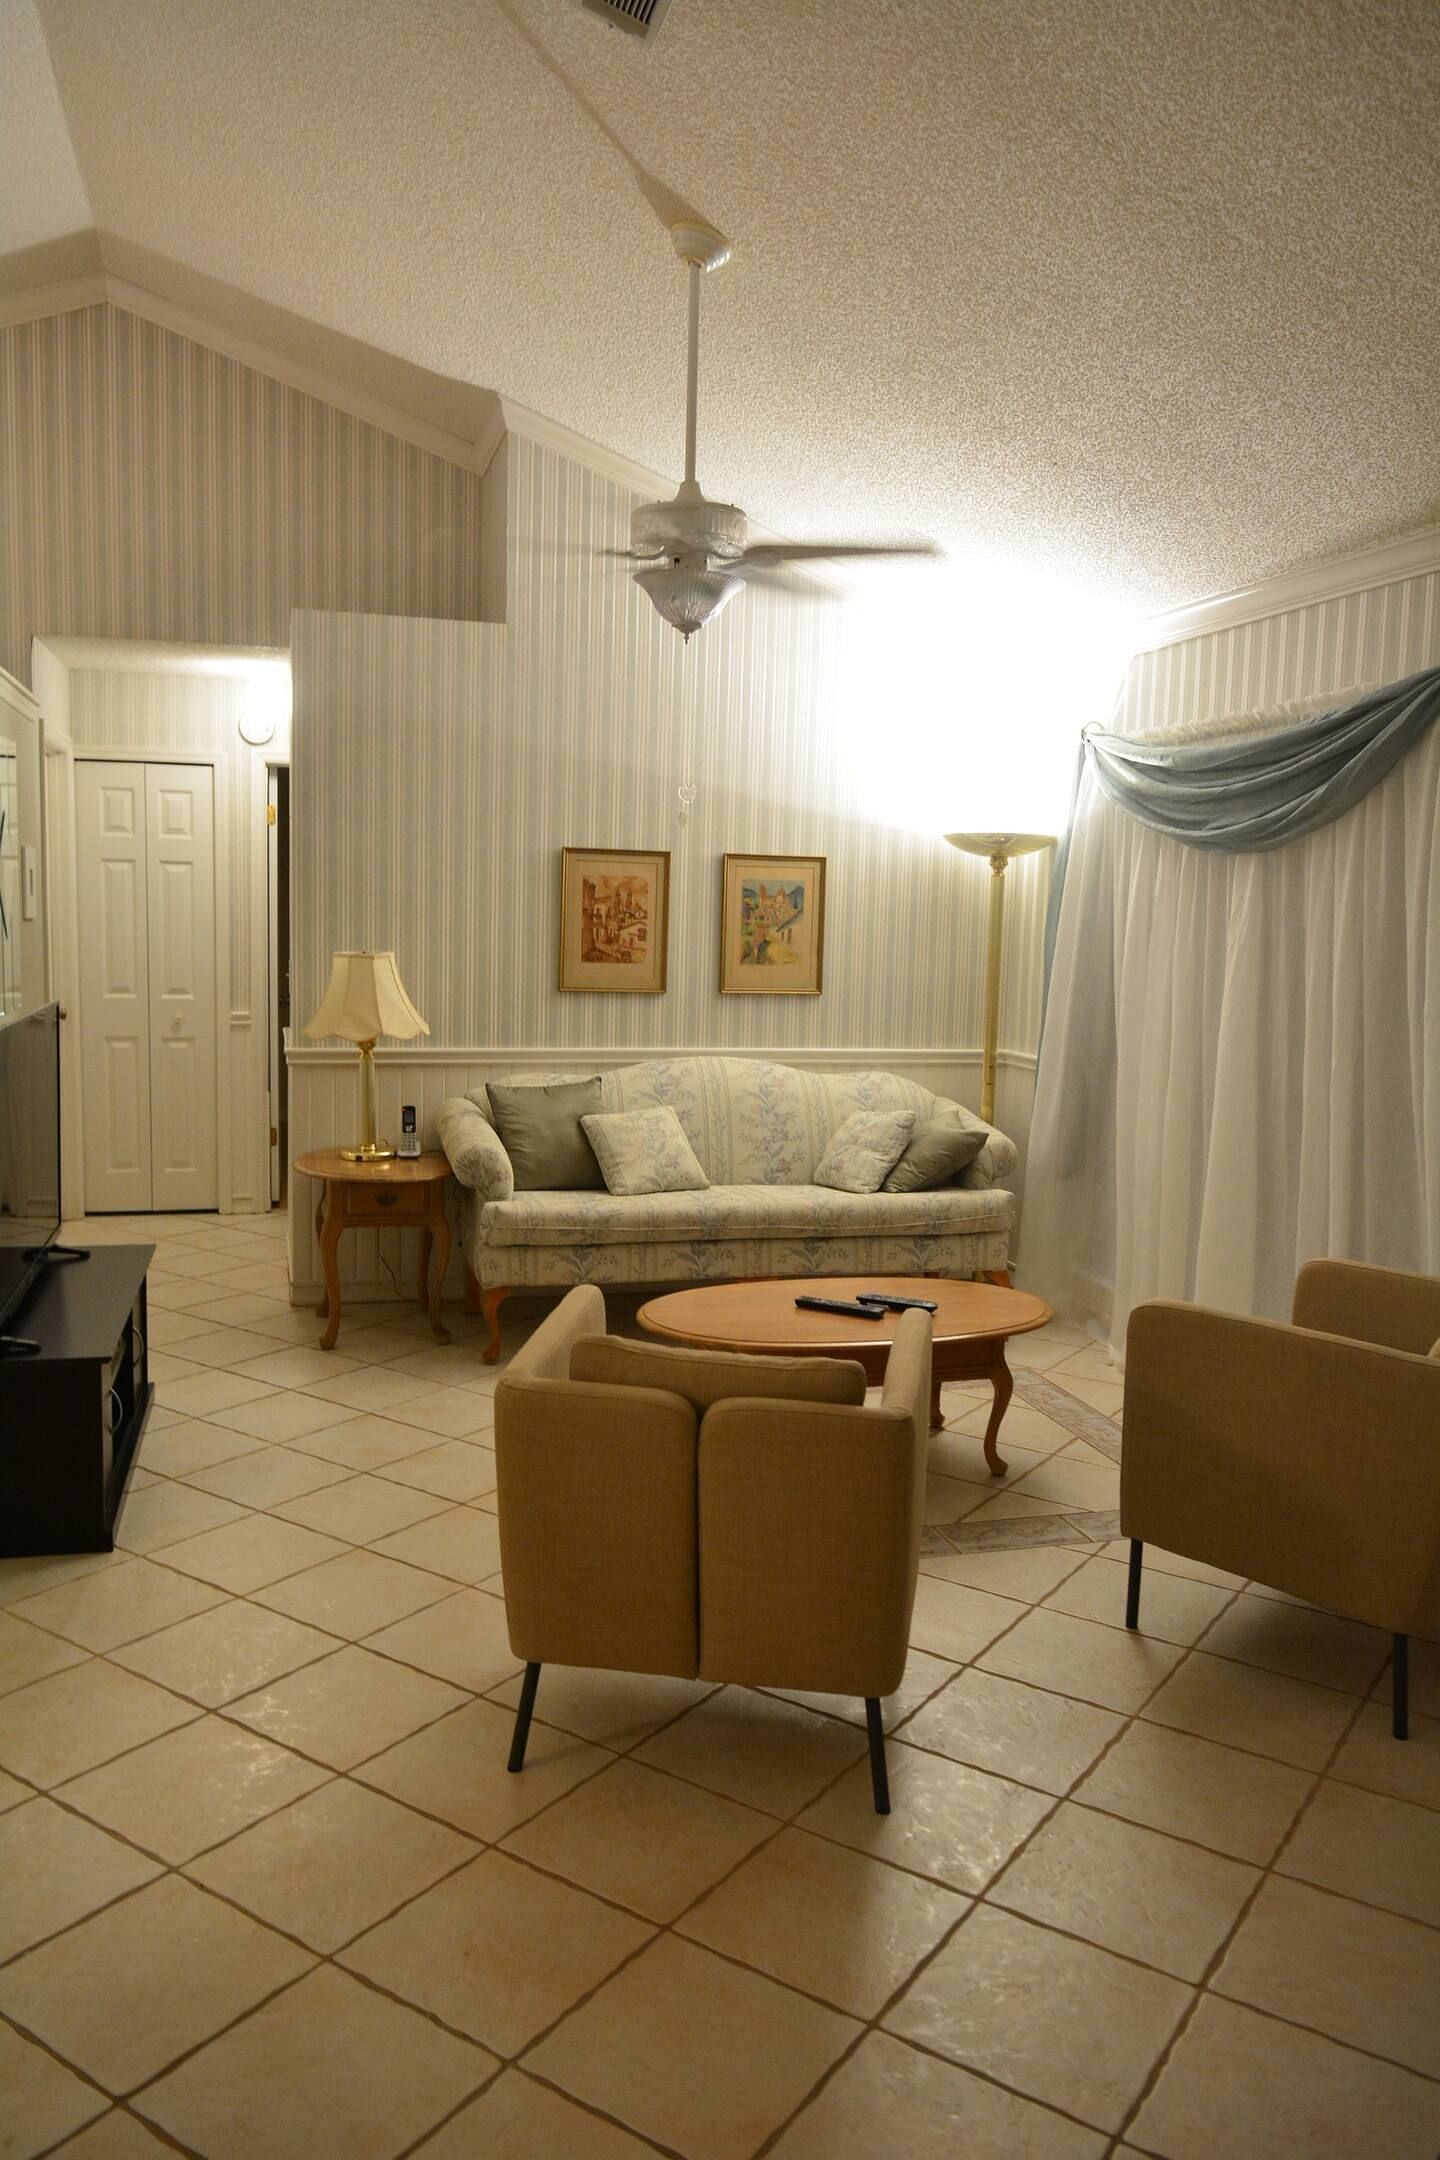 JWguest House at Orlando, Florida | Private Home with Pool, 3 Bd 2 Bath, Close to Disney | Jwbnb no brobnb 8